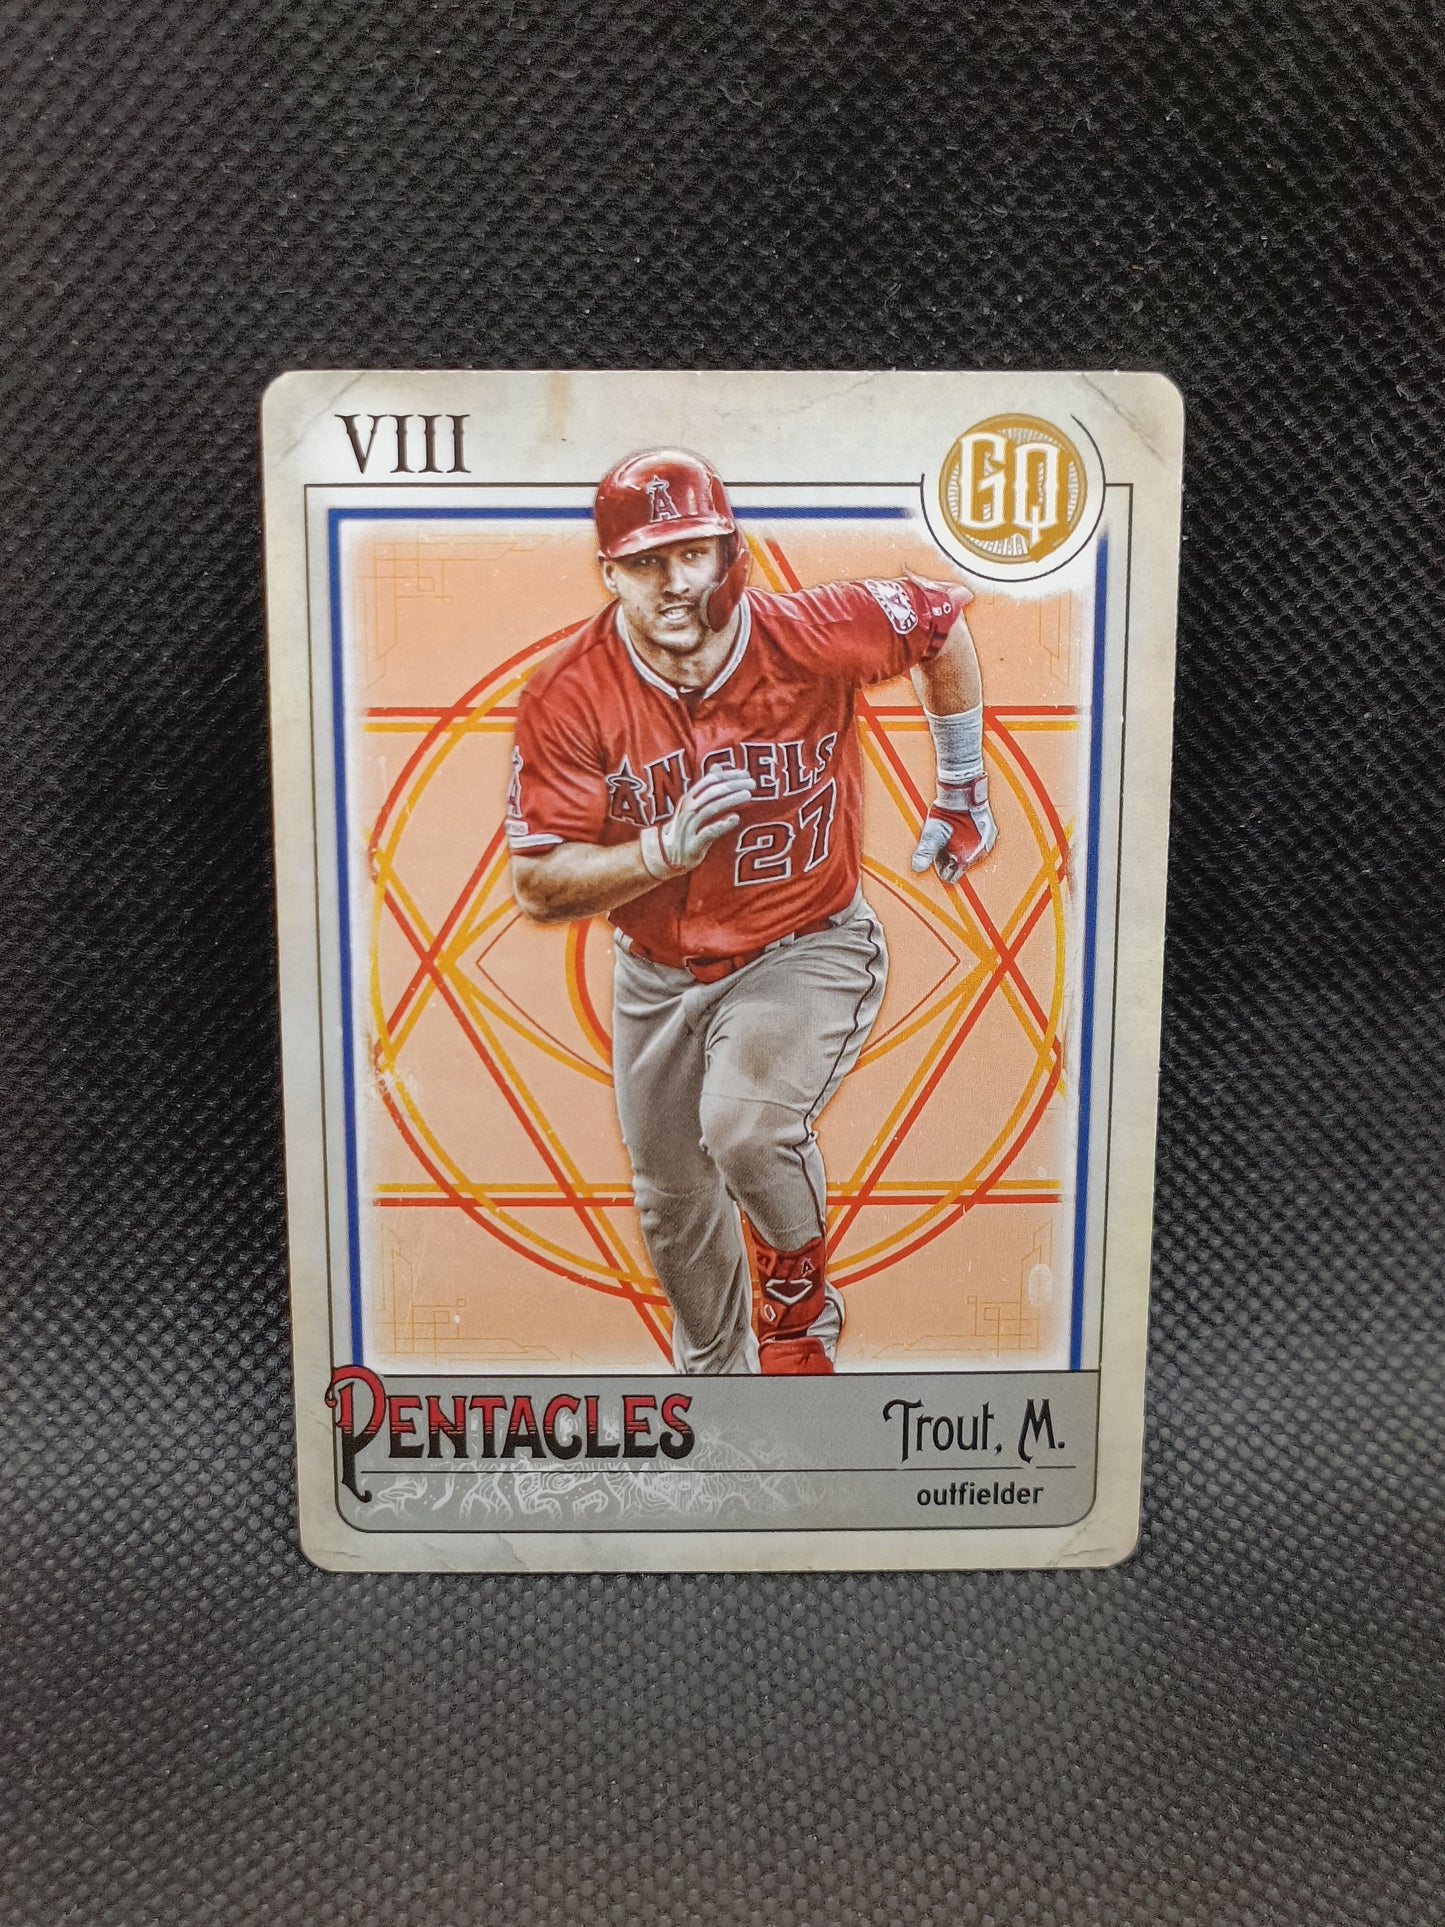 Mike Trout - 2021 Topps Gypsy Queen Tarot Of The Diamond Insert - LA Angels